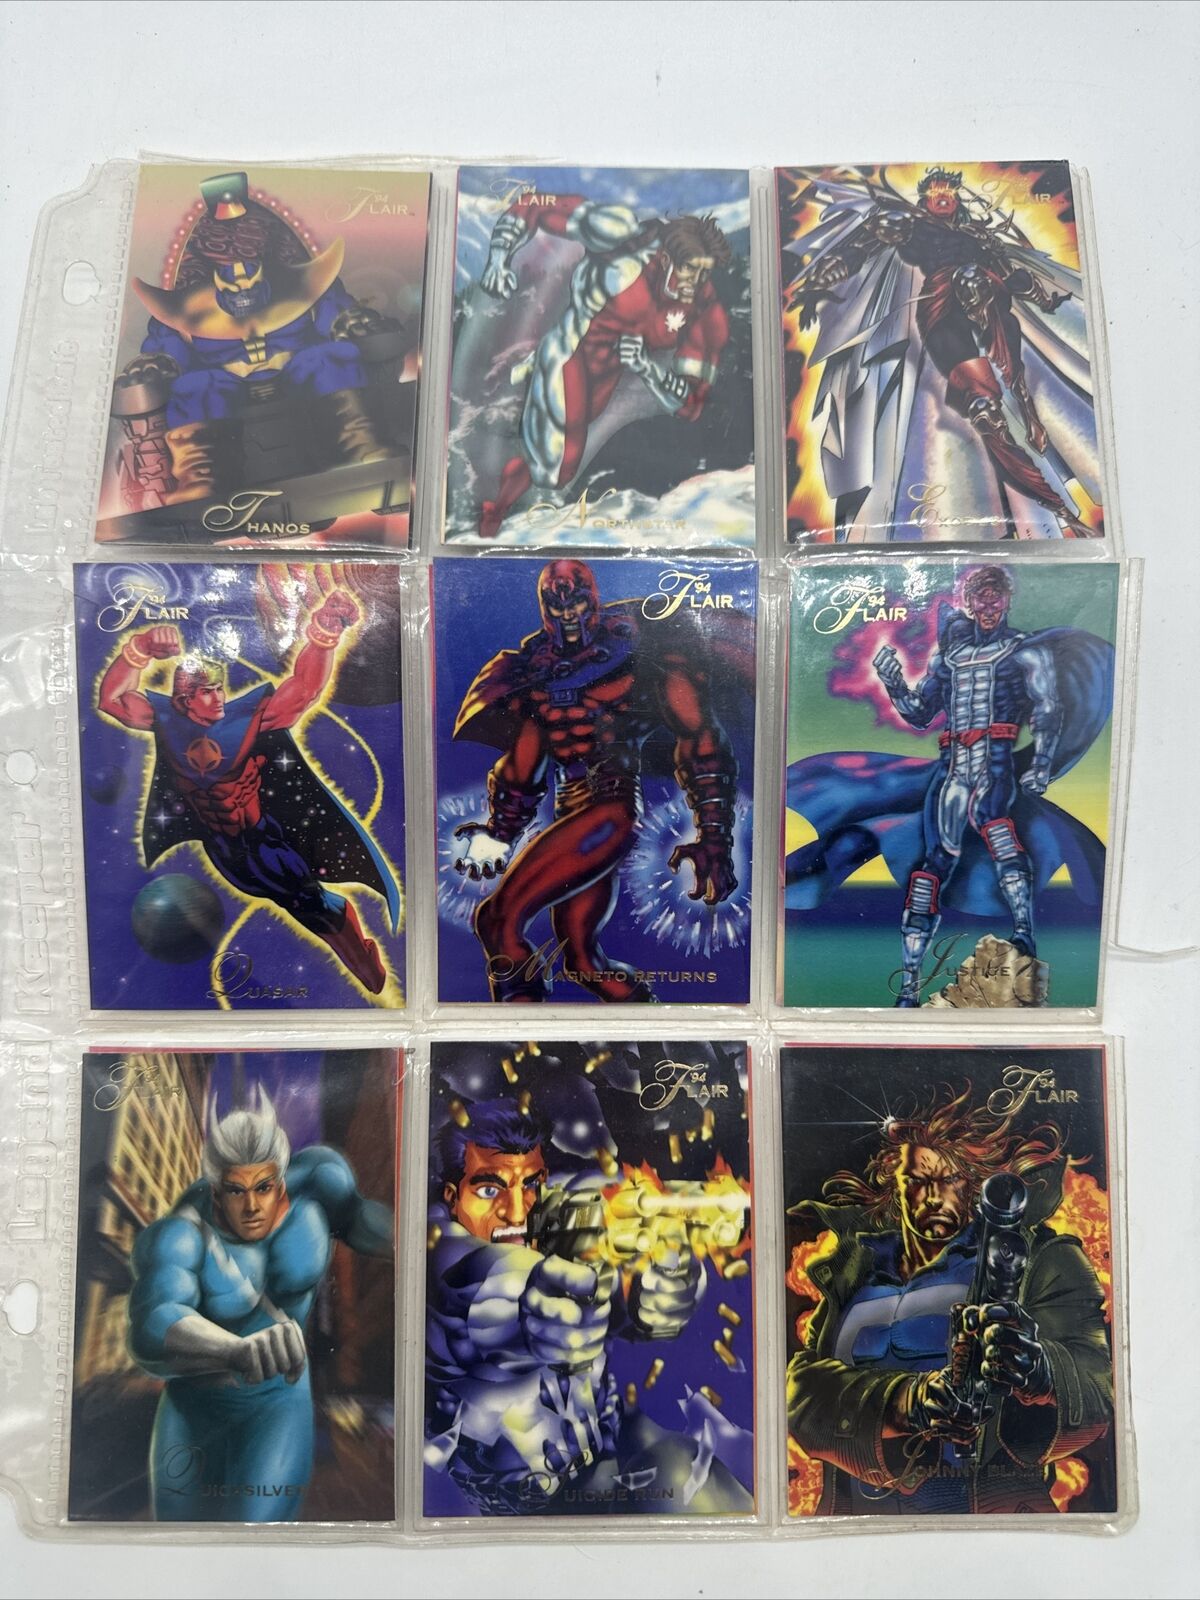 1994 FLAIR MARVEL COMICS TRADING CARDS PARTIAL SET 17 CARDS BASE UNGRADED